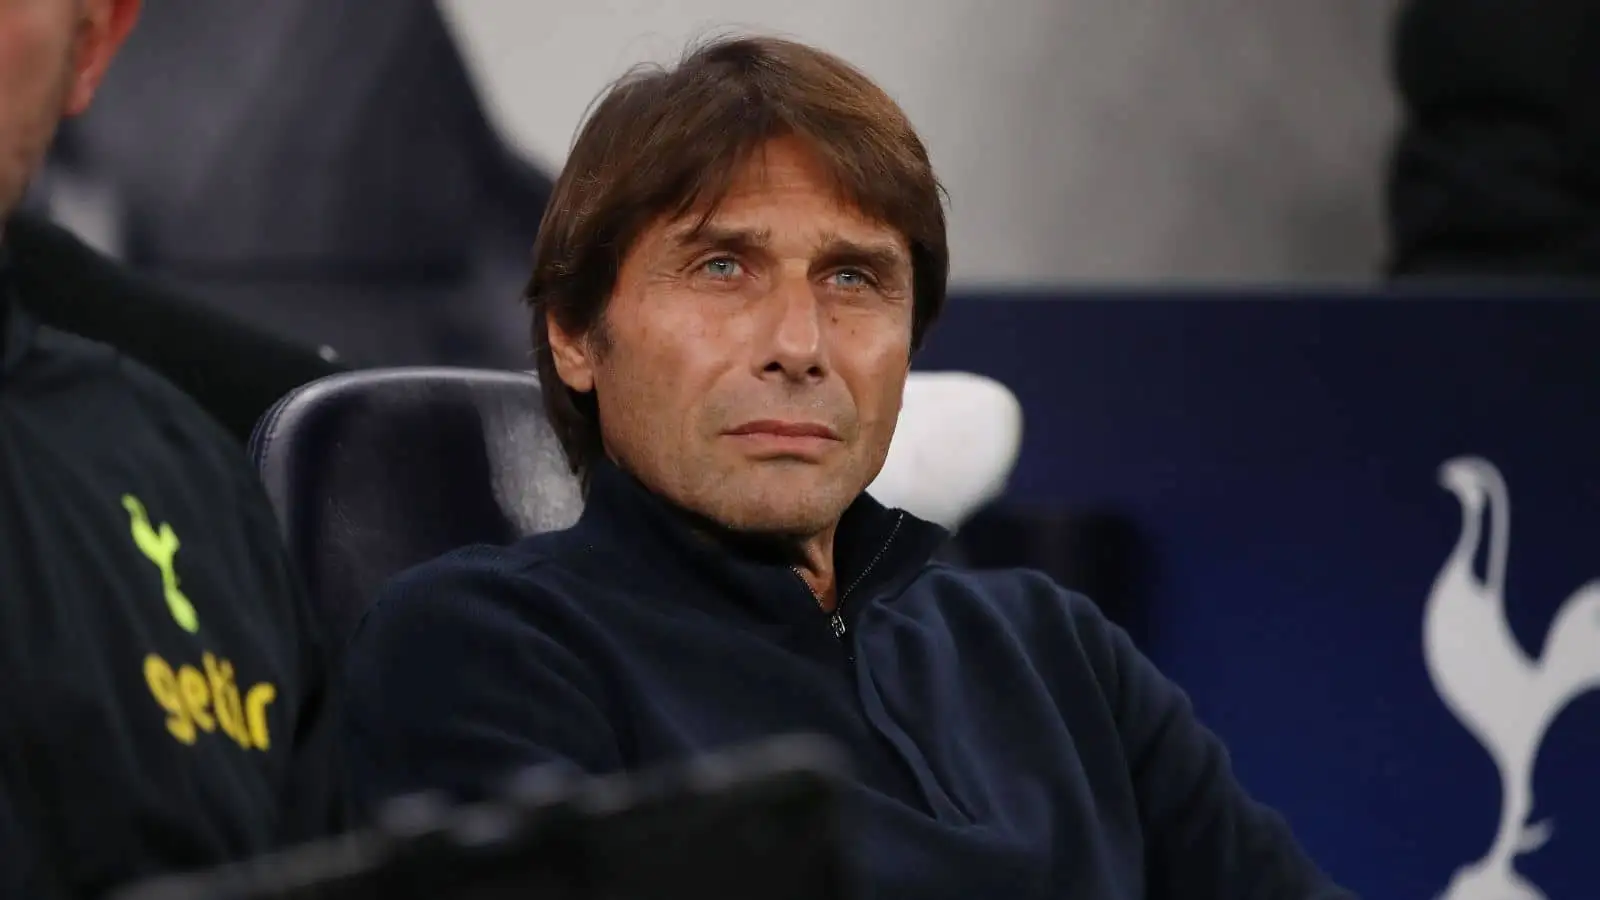 Antonio Conte sends emotional farewell message to Tottenham fans but makes ‘intense’ admission